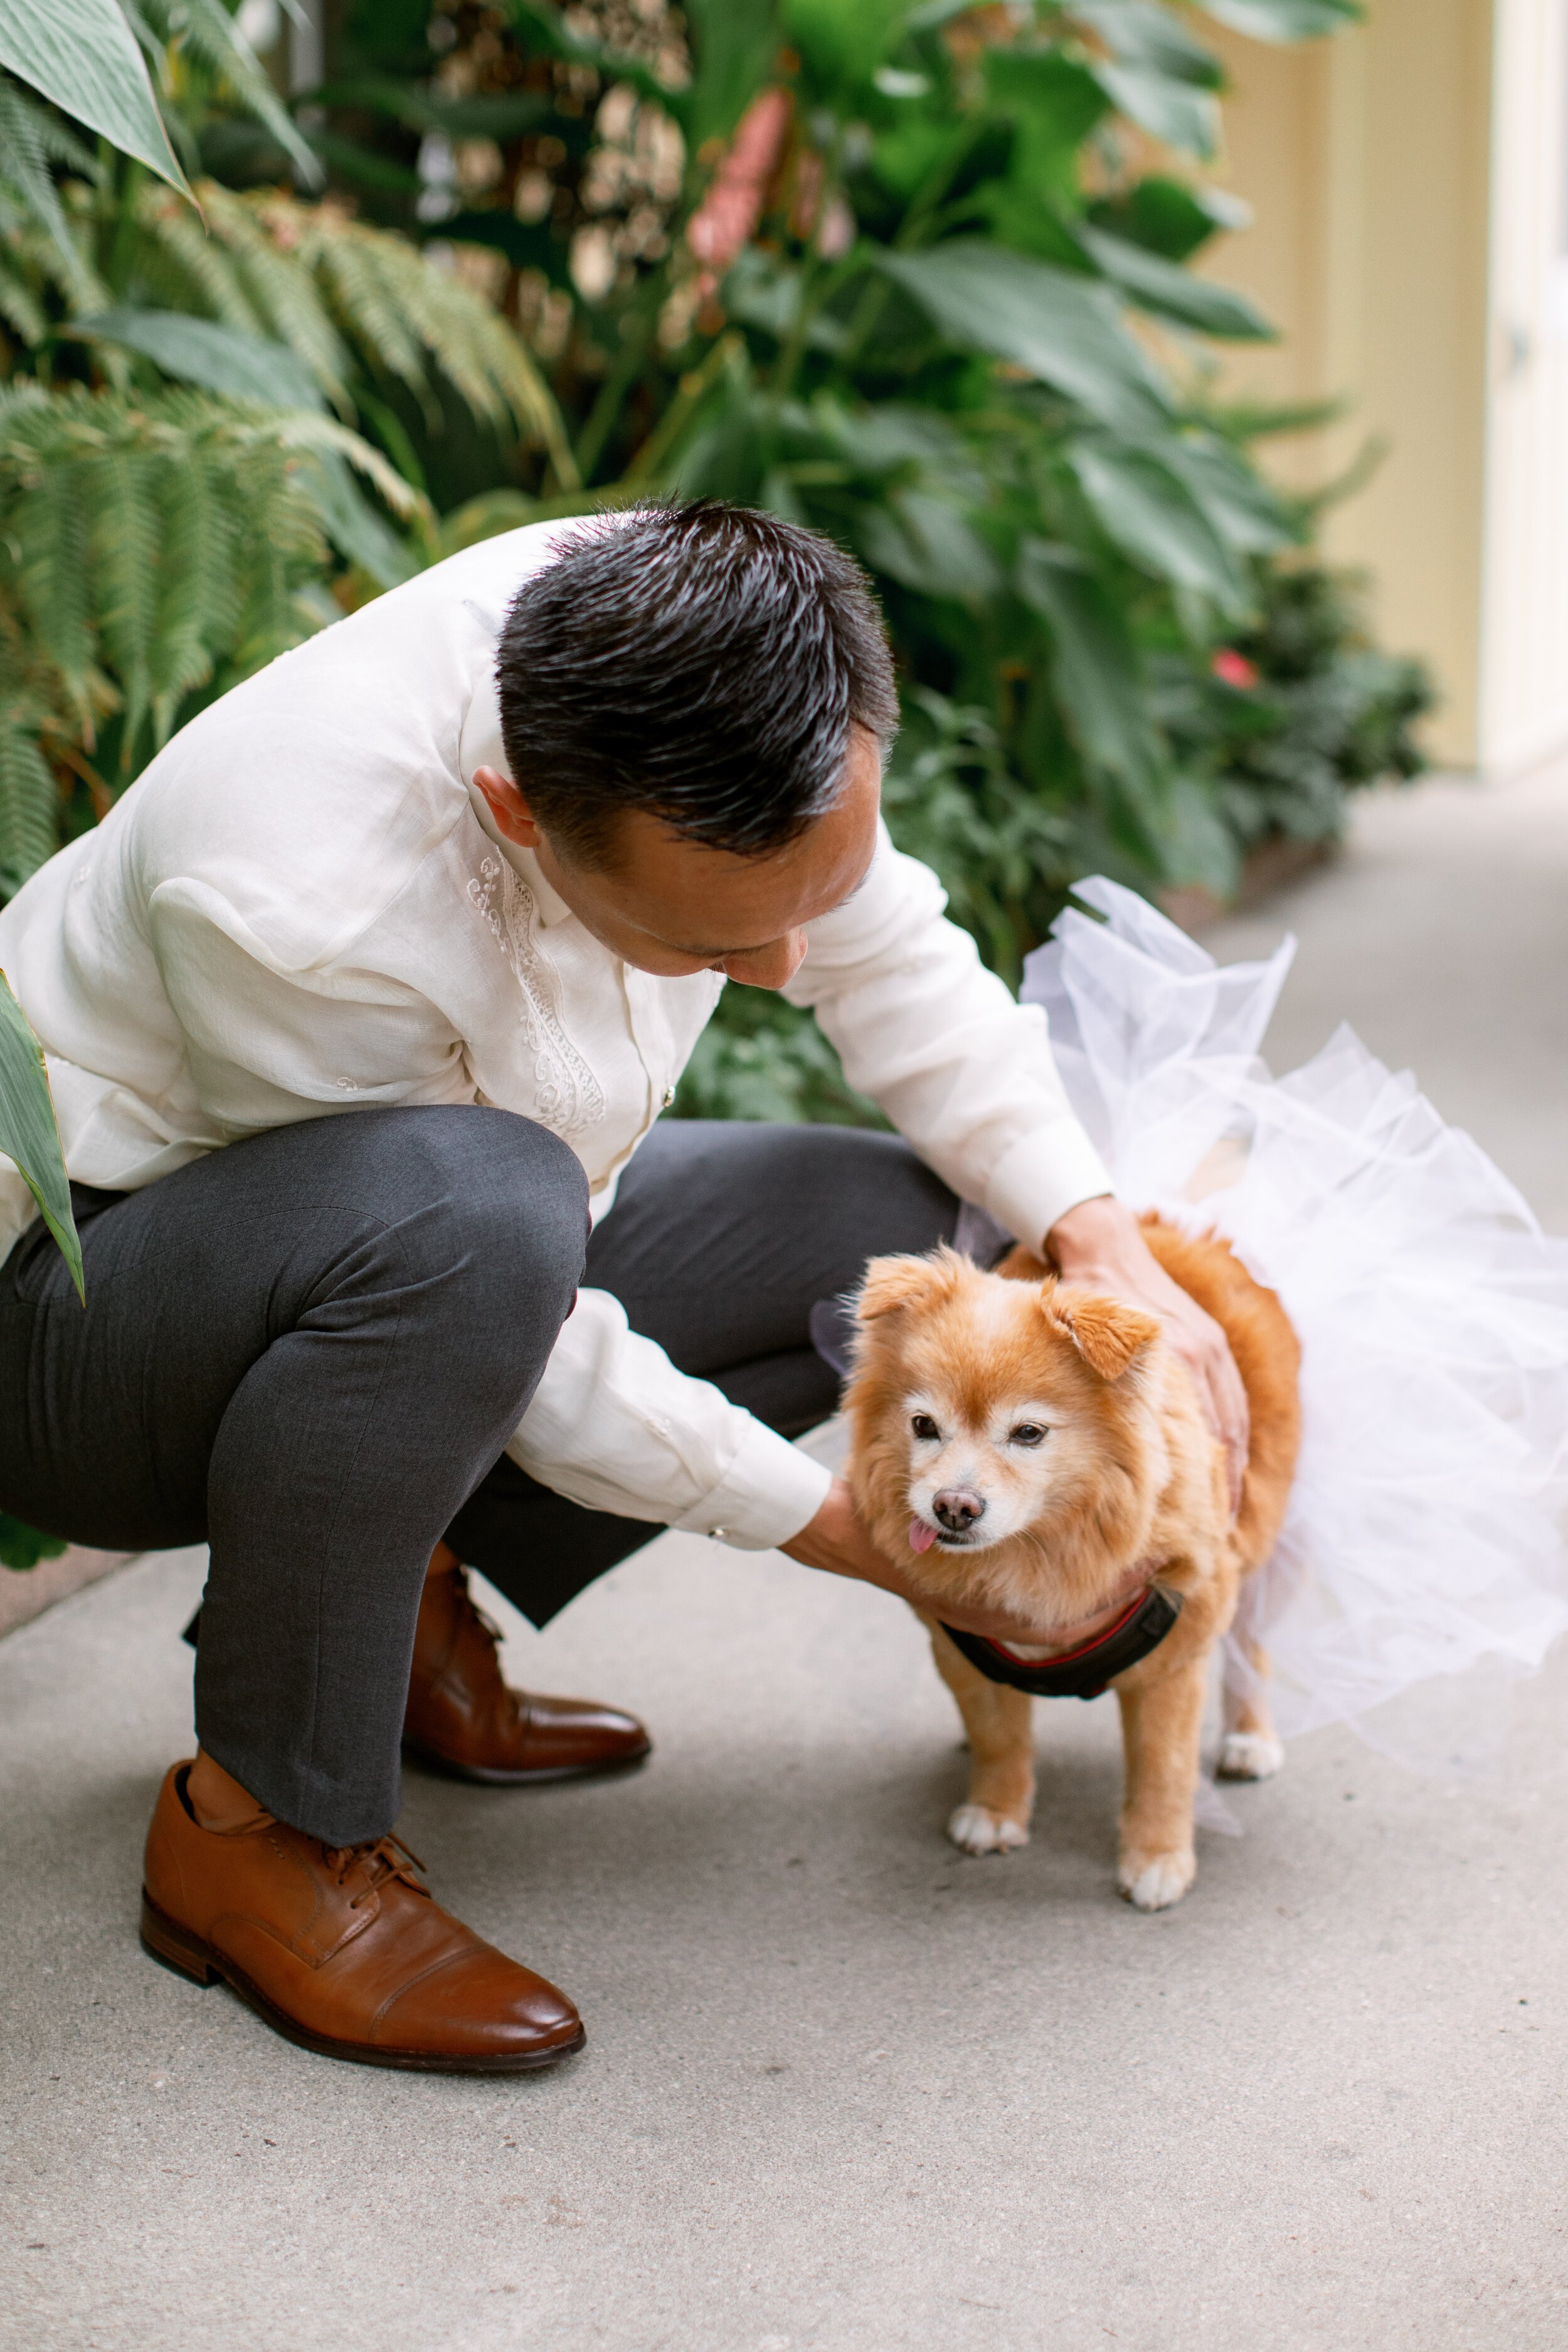 www.santabarbarawedding.com | Events by Fran | Chase Palm Park | Anna Delores Photography | Pineapple Industries | Groom with Dog in a Tutu